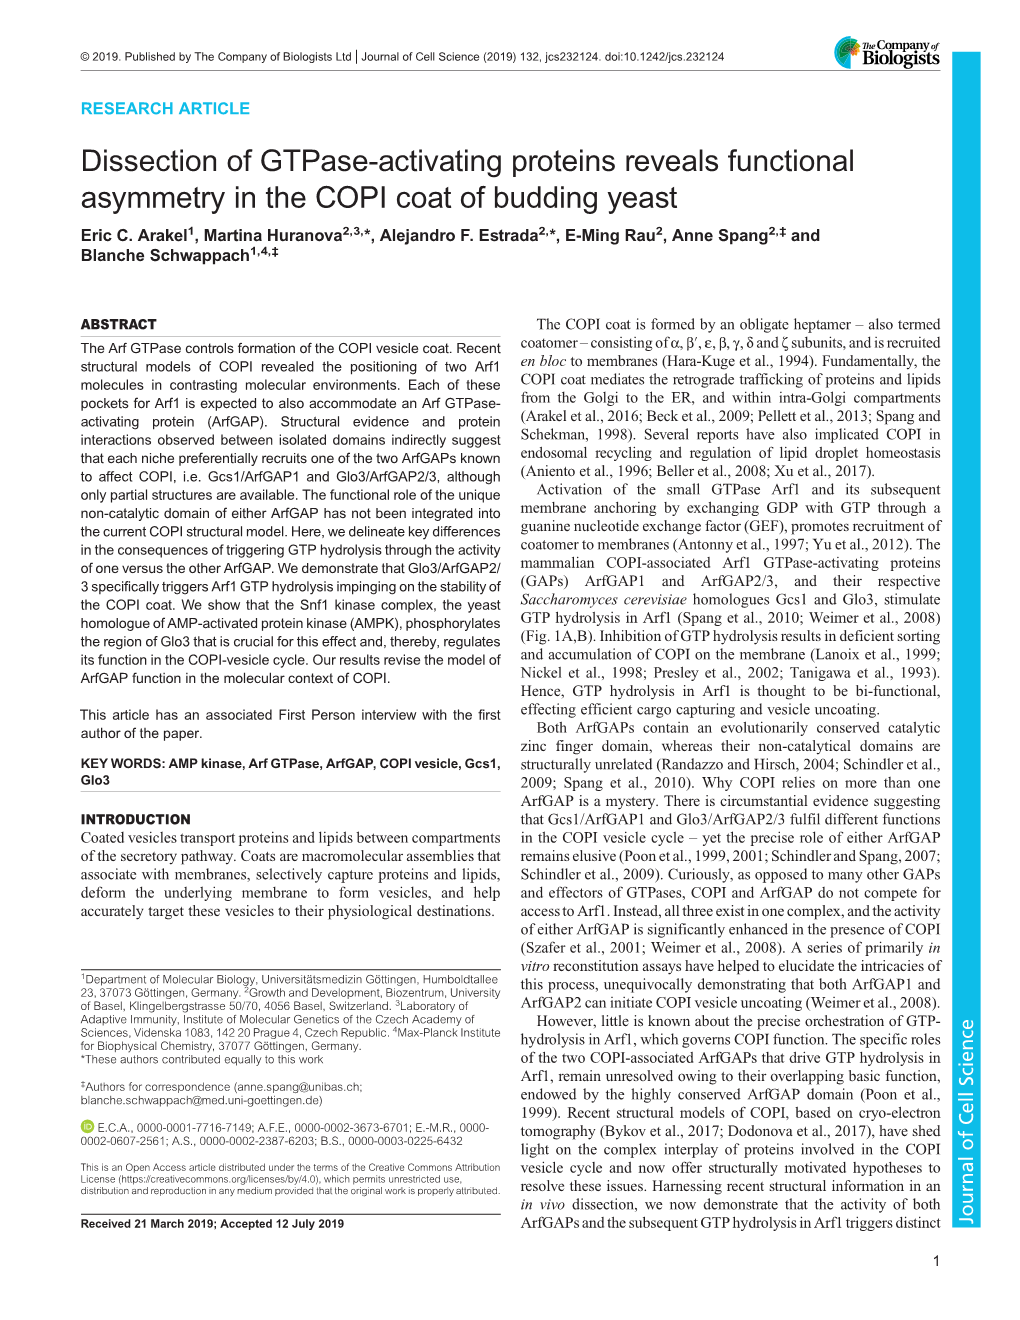 Dissection of Gtpase-Activating Proteins Reveals Functional Asymmetry in the COPI Coat of Budding Yeast Eric C